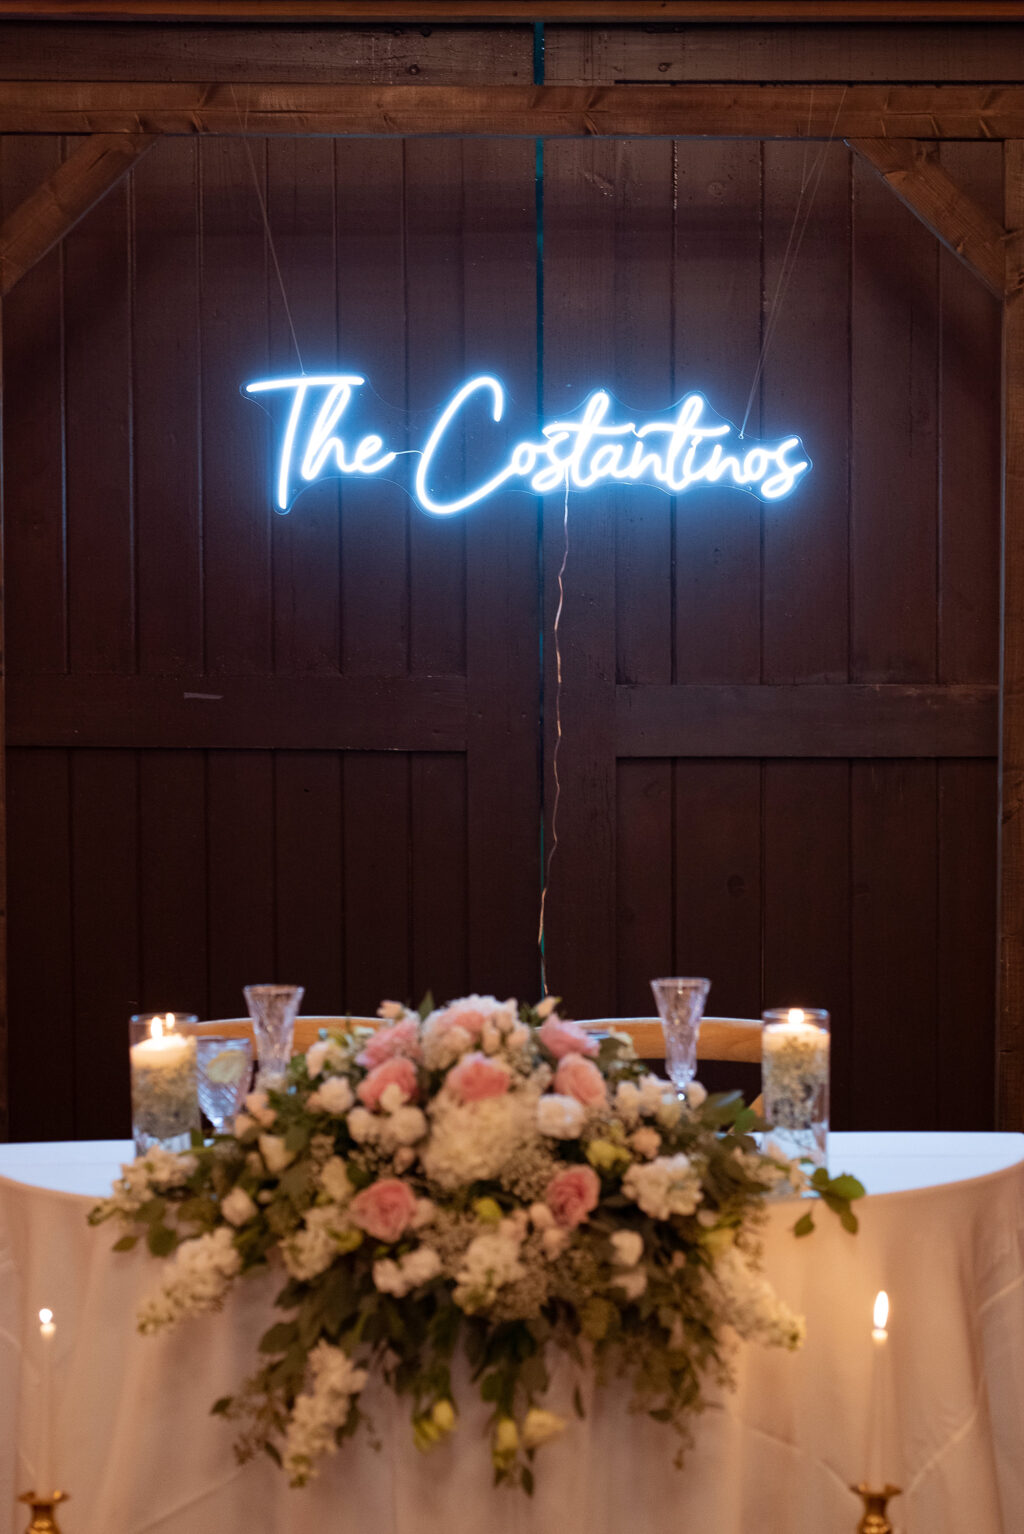 Custom Last Name Neon Sign | Table Top Floral Arrangement with White Hydrangeas, Stock Flowers, Pink Roses, Greenery Ideas | Sage Green and Blush Wedding Reception Inspiration